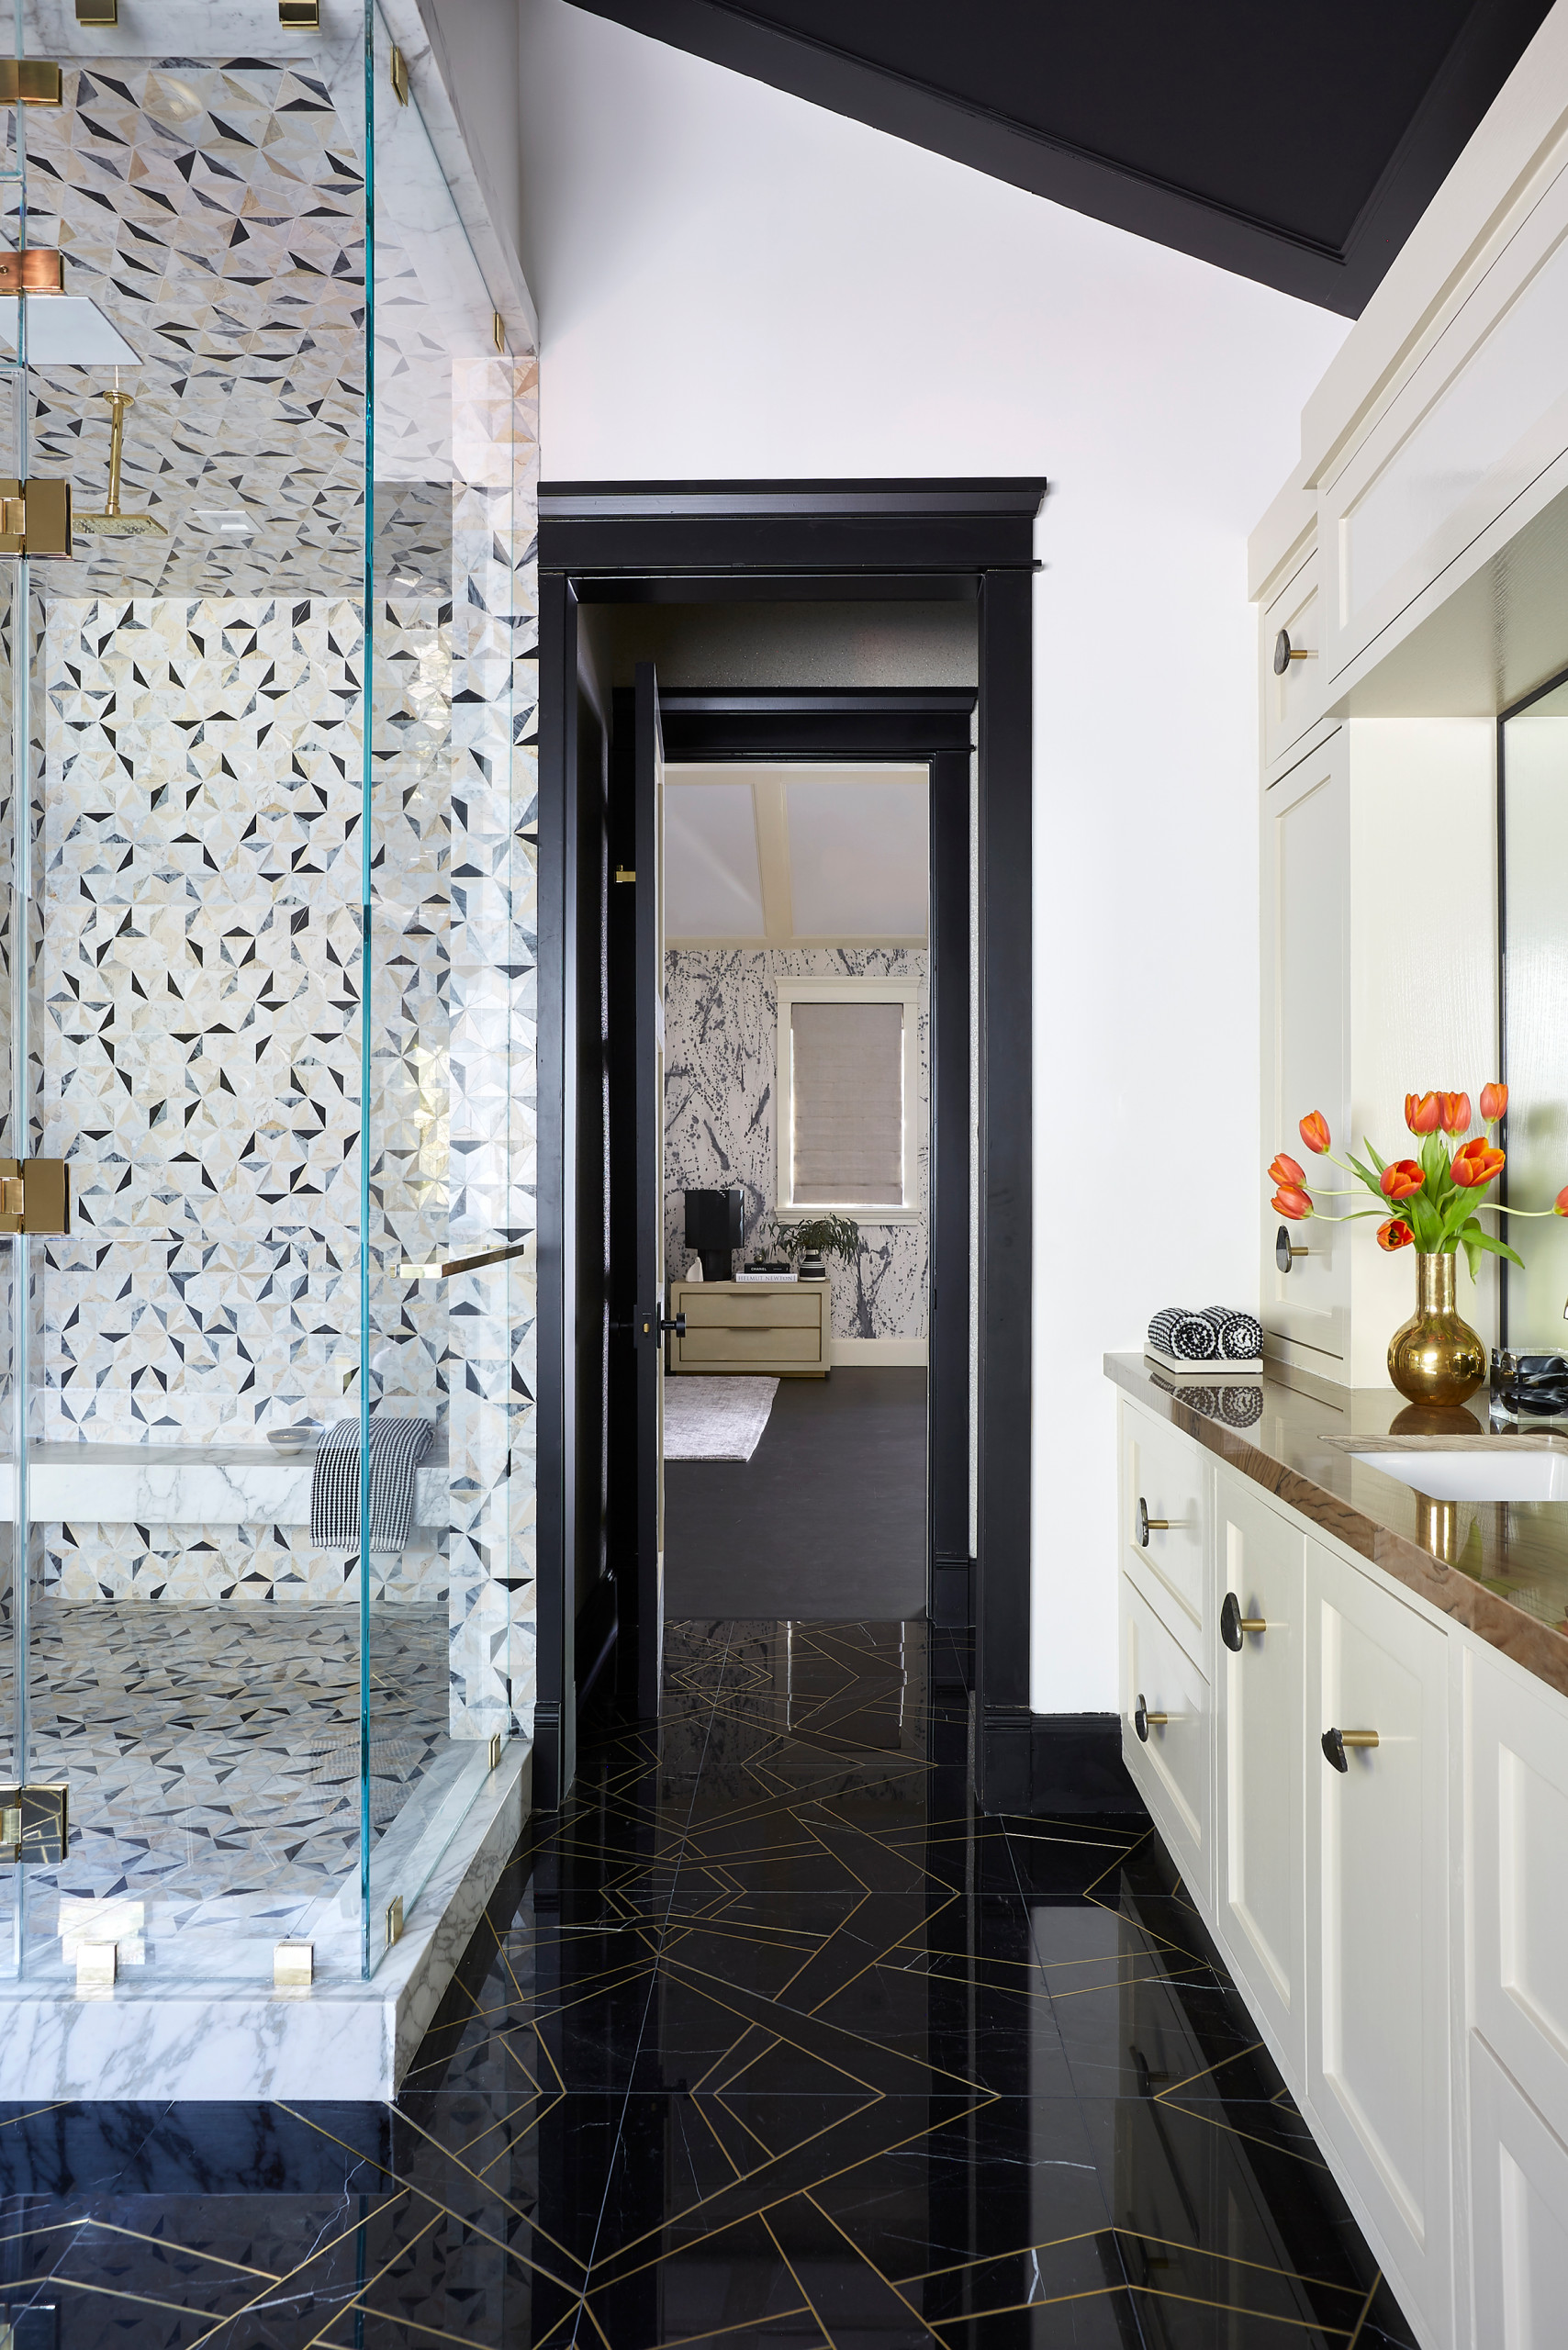 75 Beautiful Black Tile Bathroom With Beige Cabinets Pictures Ideas March 2021 Houzz